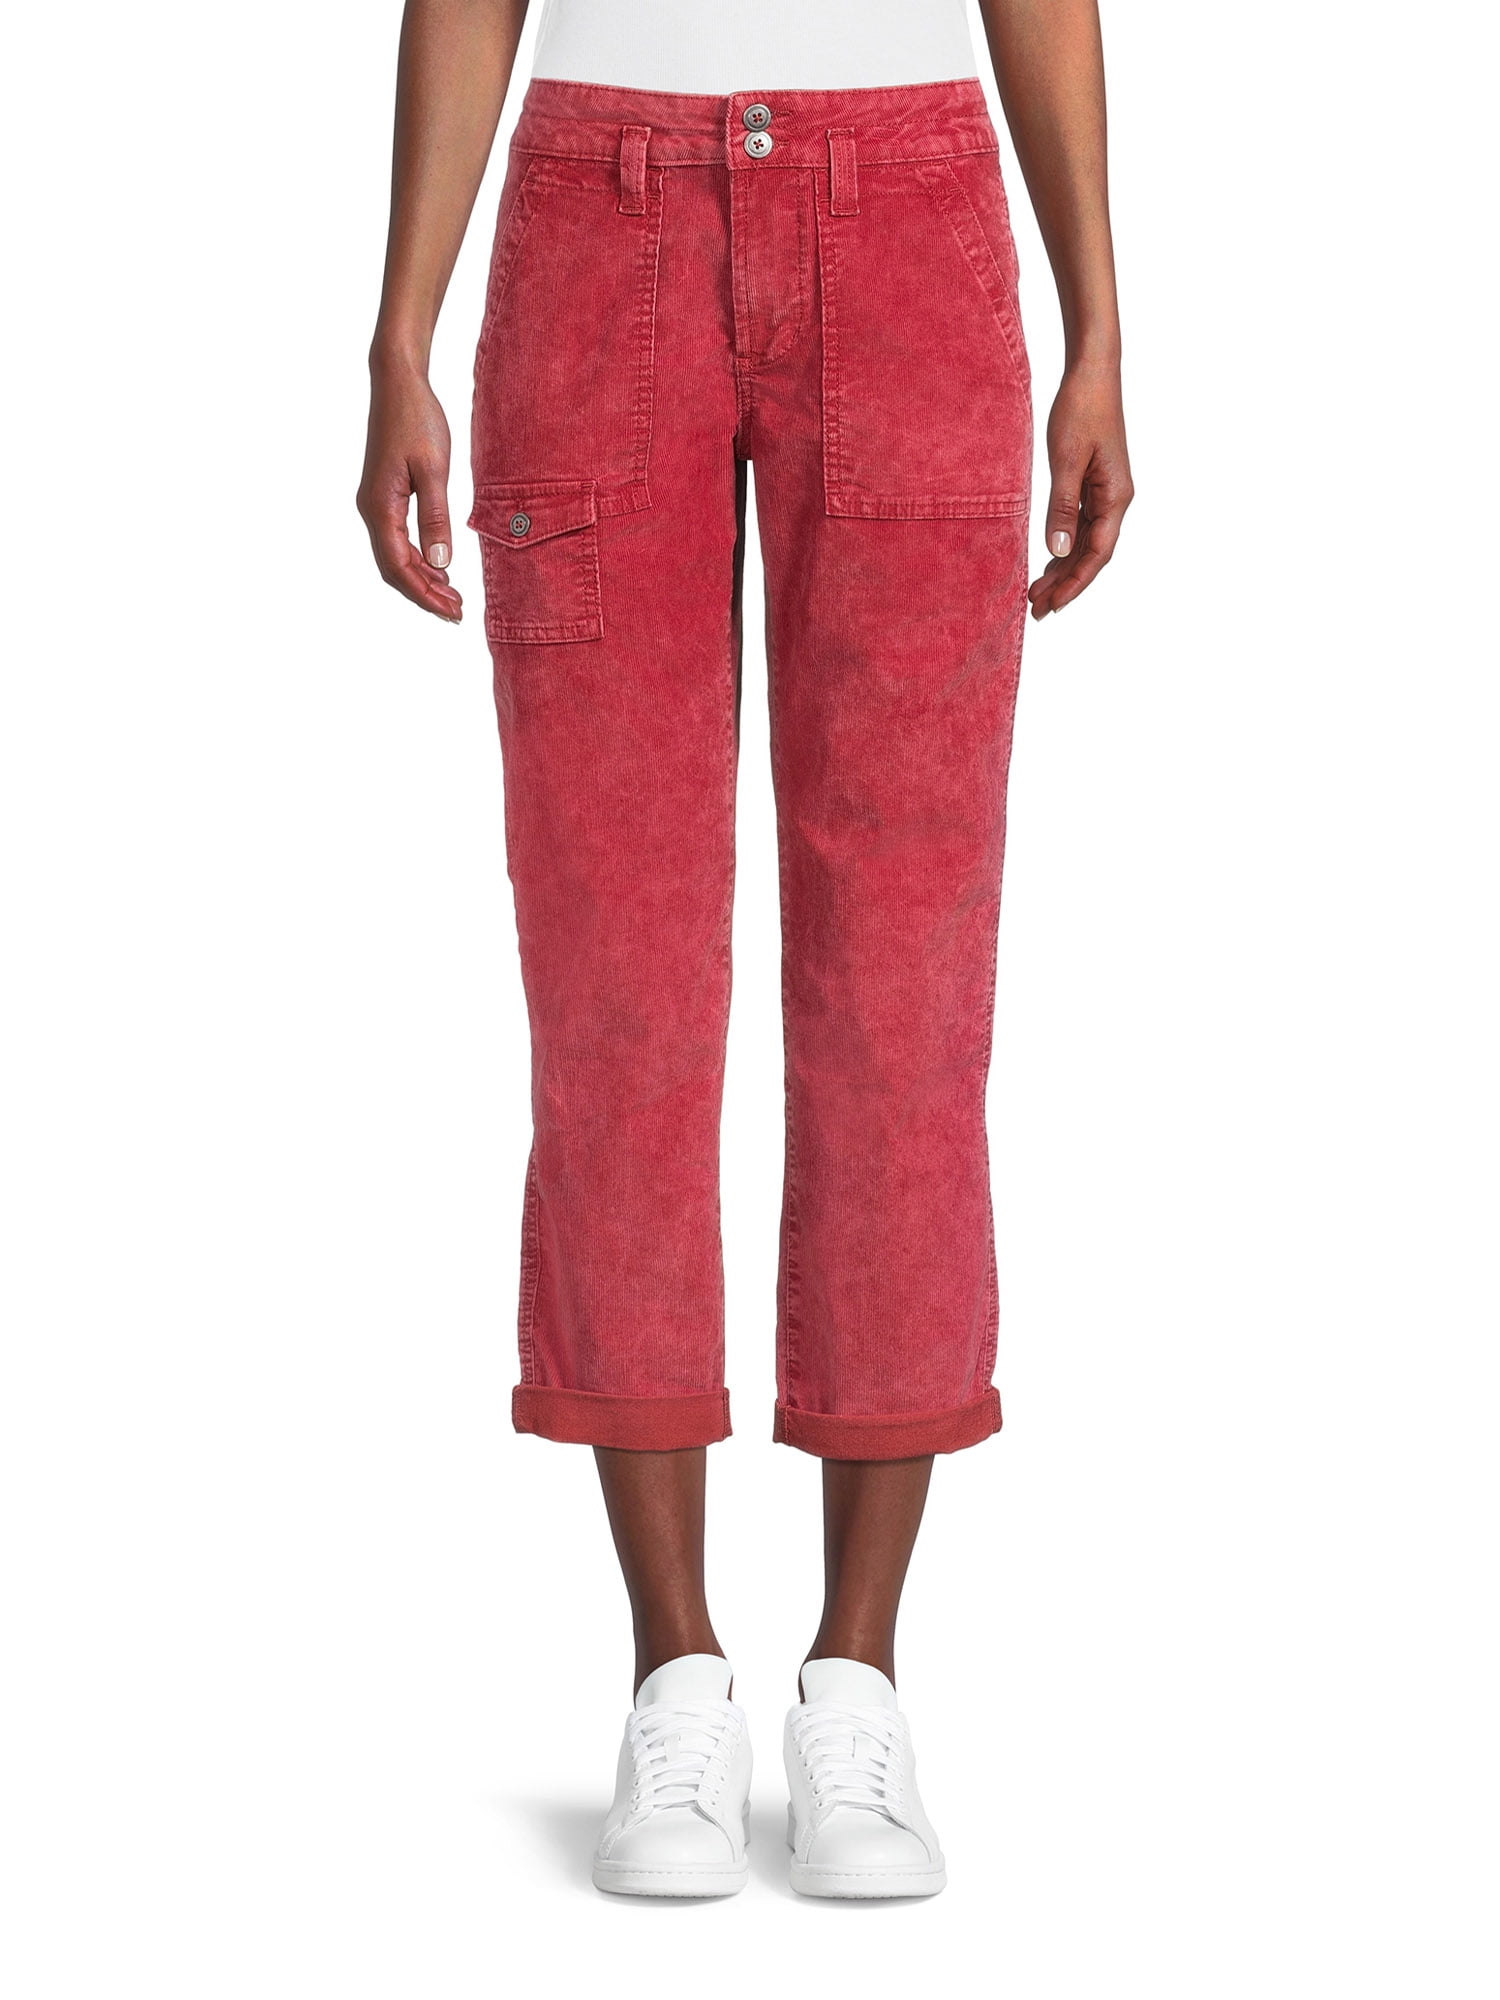 Looking for the Red Hot Red Belted Cargo Pants ?, Find Womens Pants and  more at Tobi! - 50% Off Your First Order - …